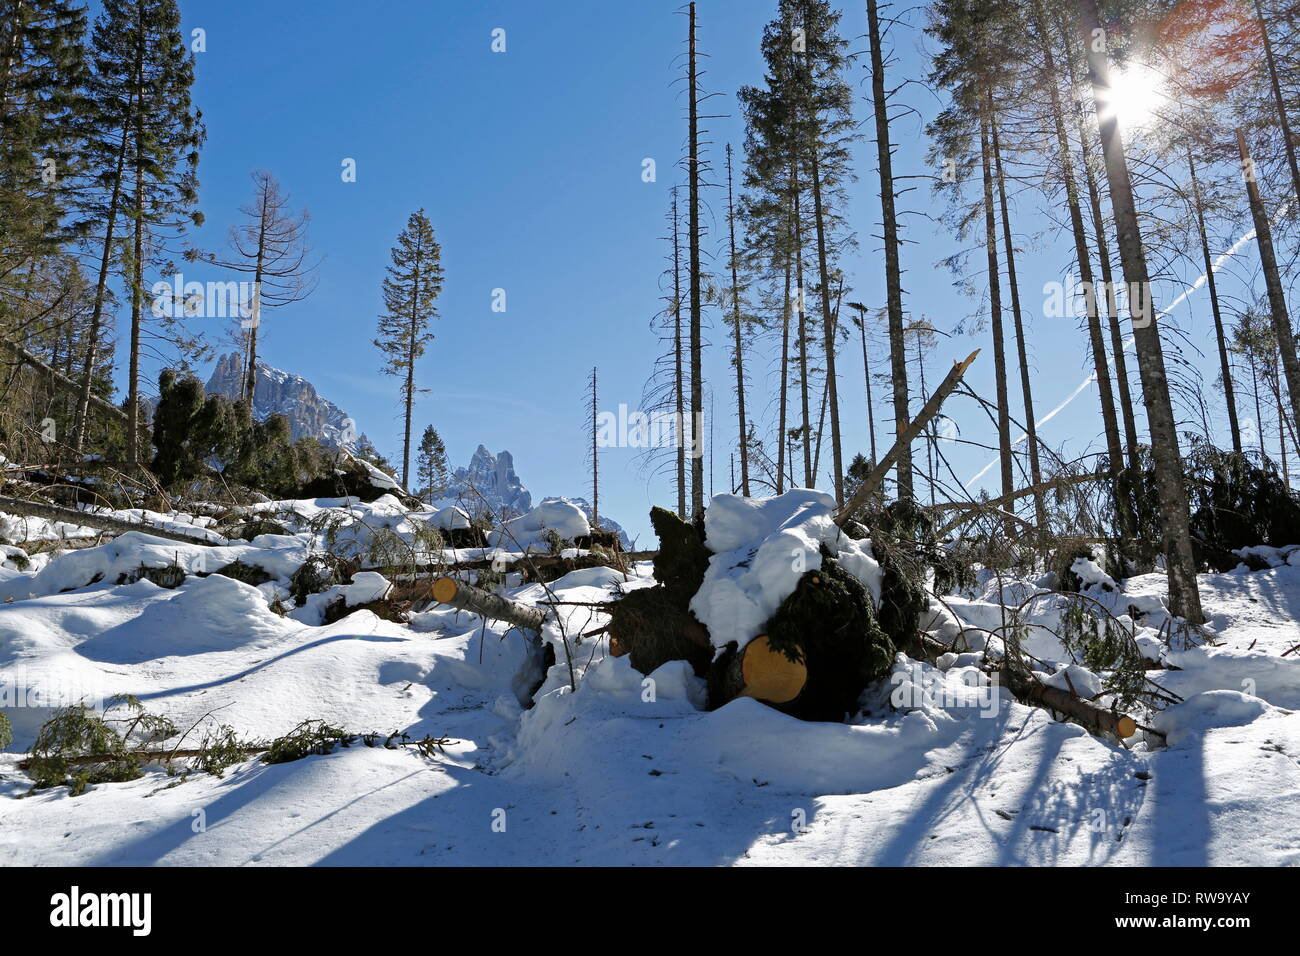 Storm damage in the mountain forest, Dolomites, Trentino, Italy, Europe Stock Photo